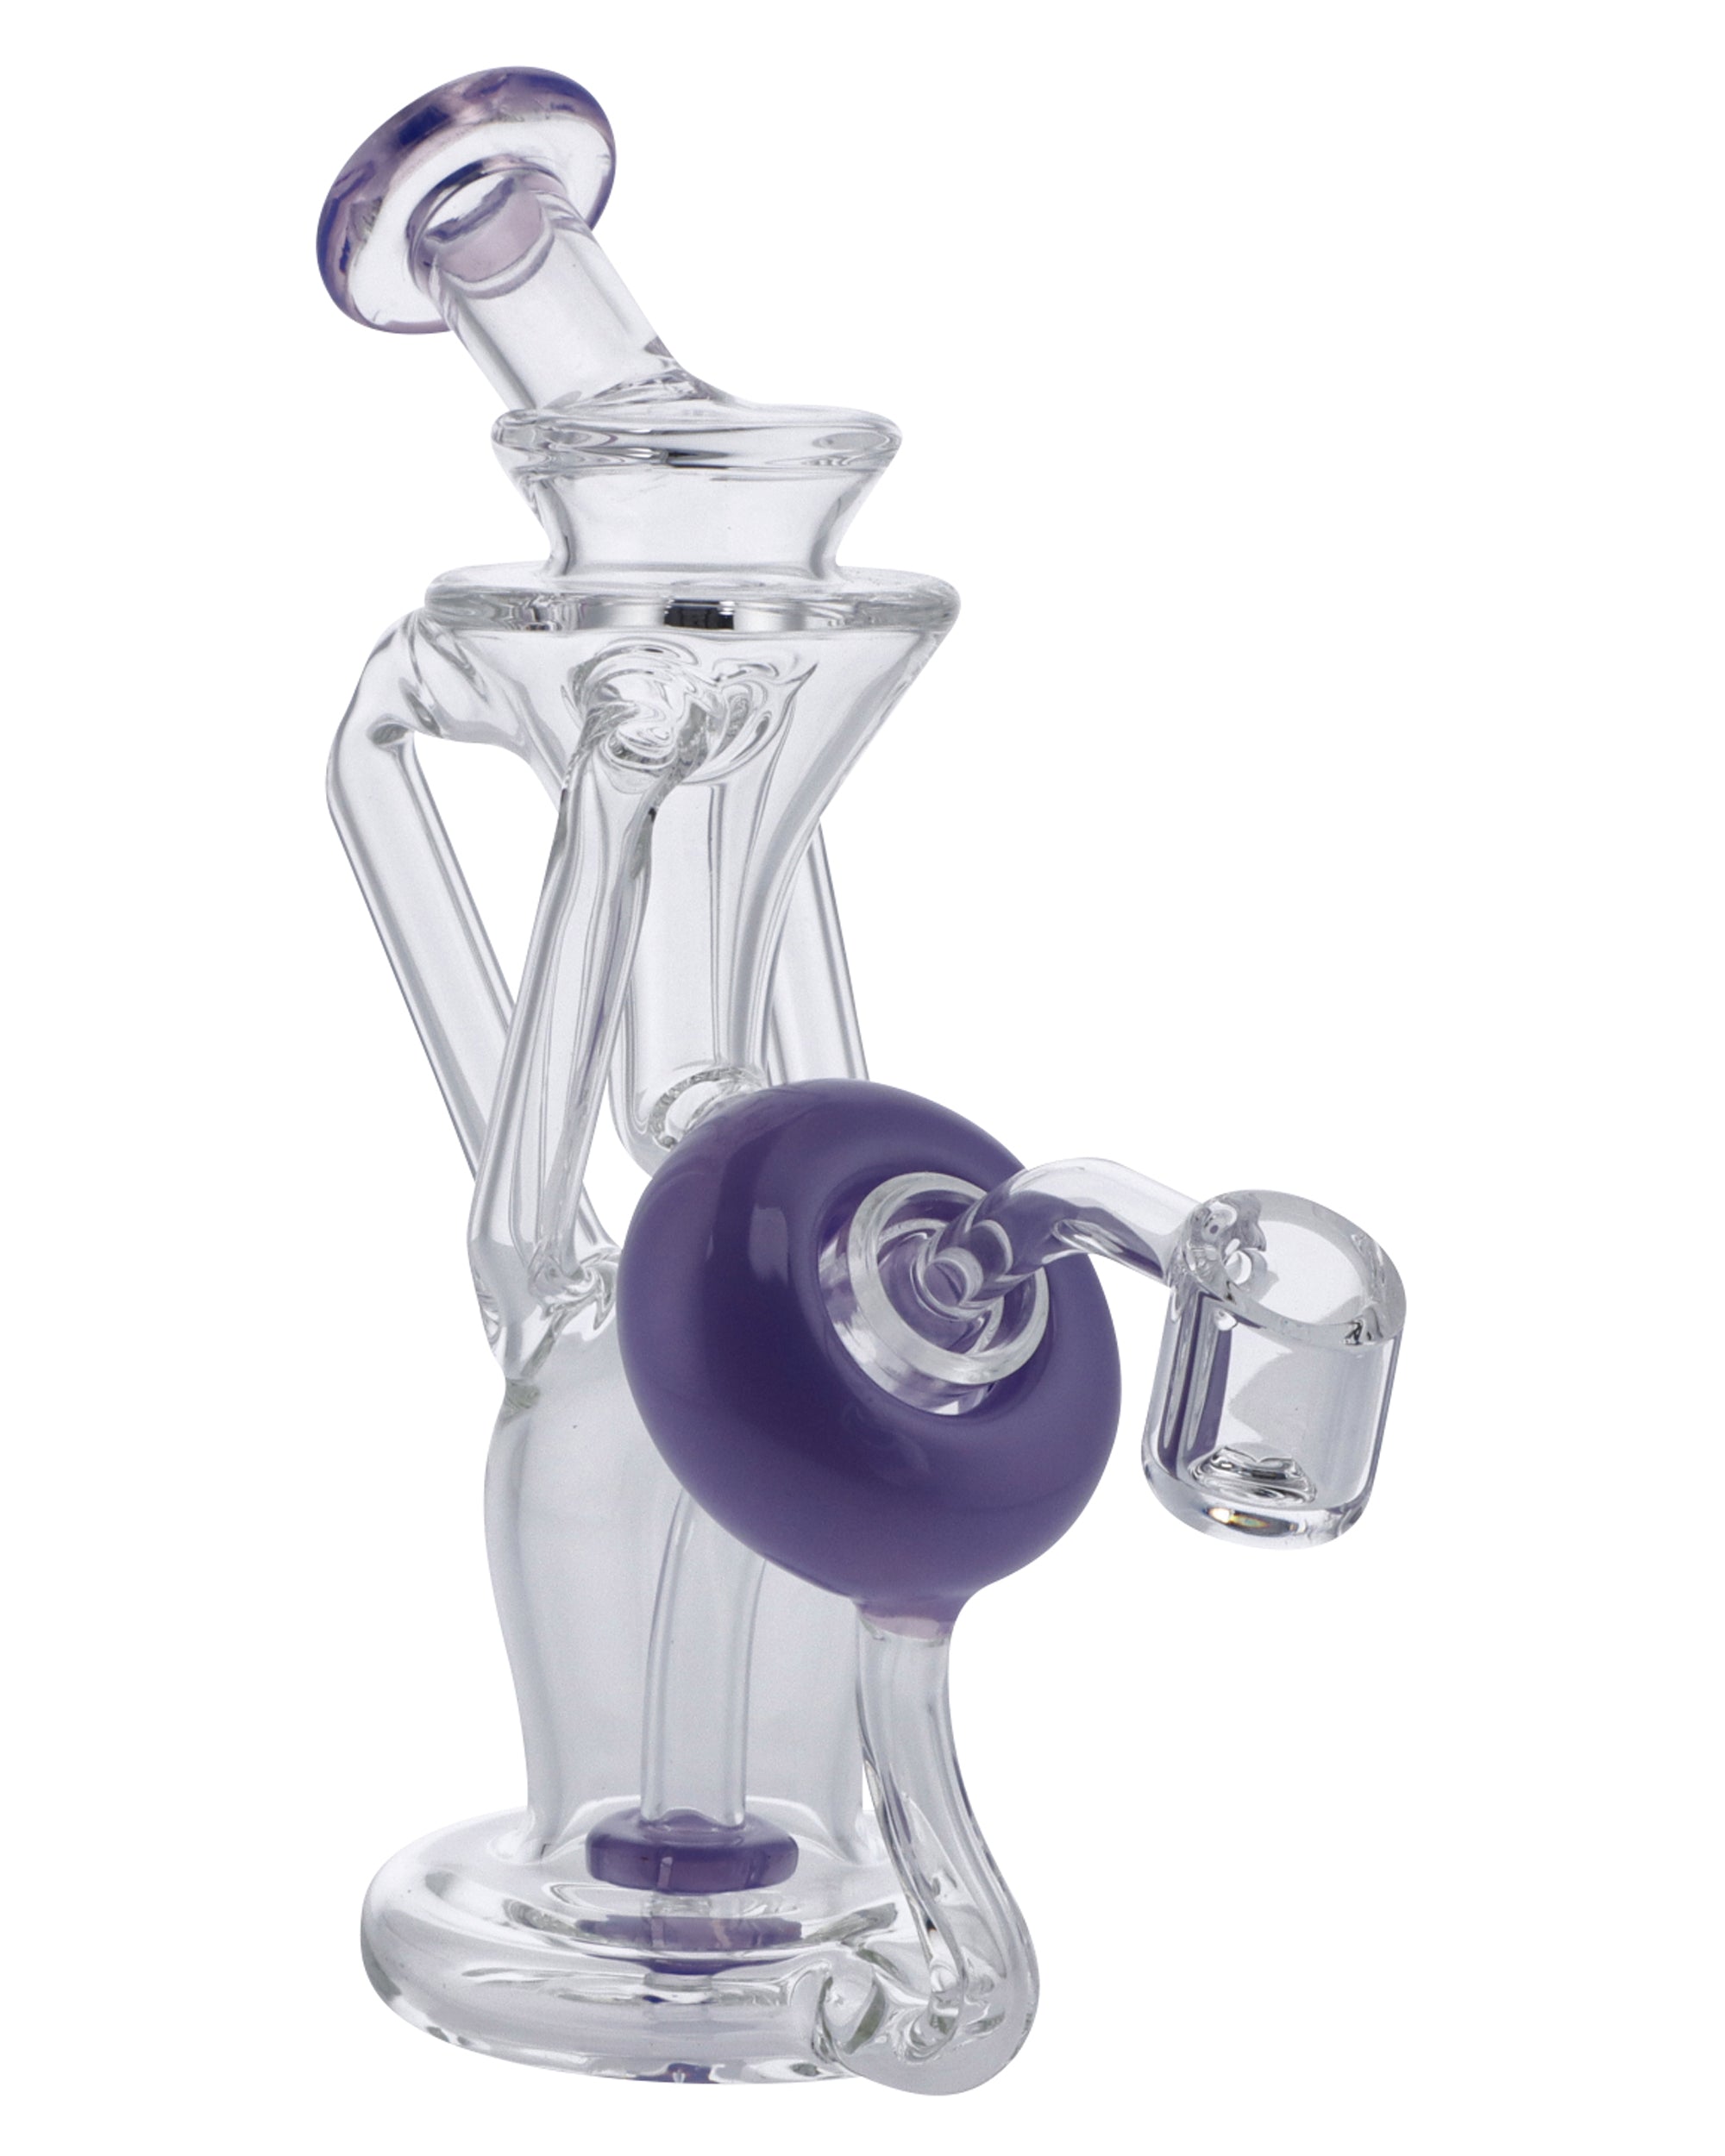 Bent Neck Dab Rig Recycler-Milky Purple-6in(RCL-S-034MPP)